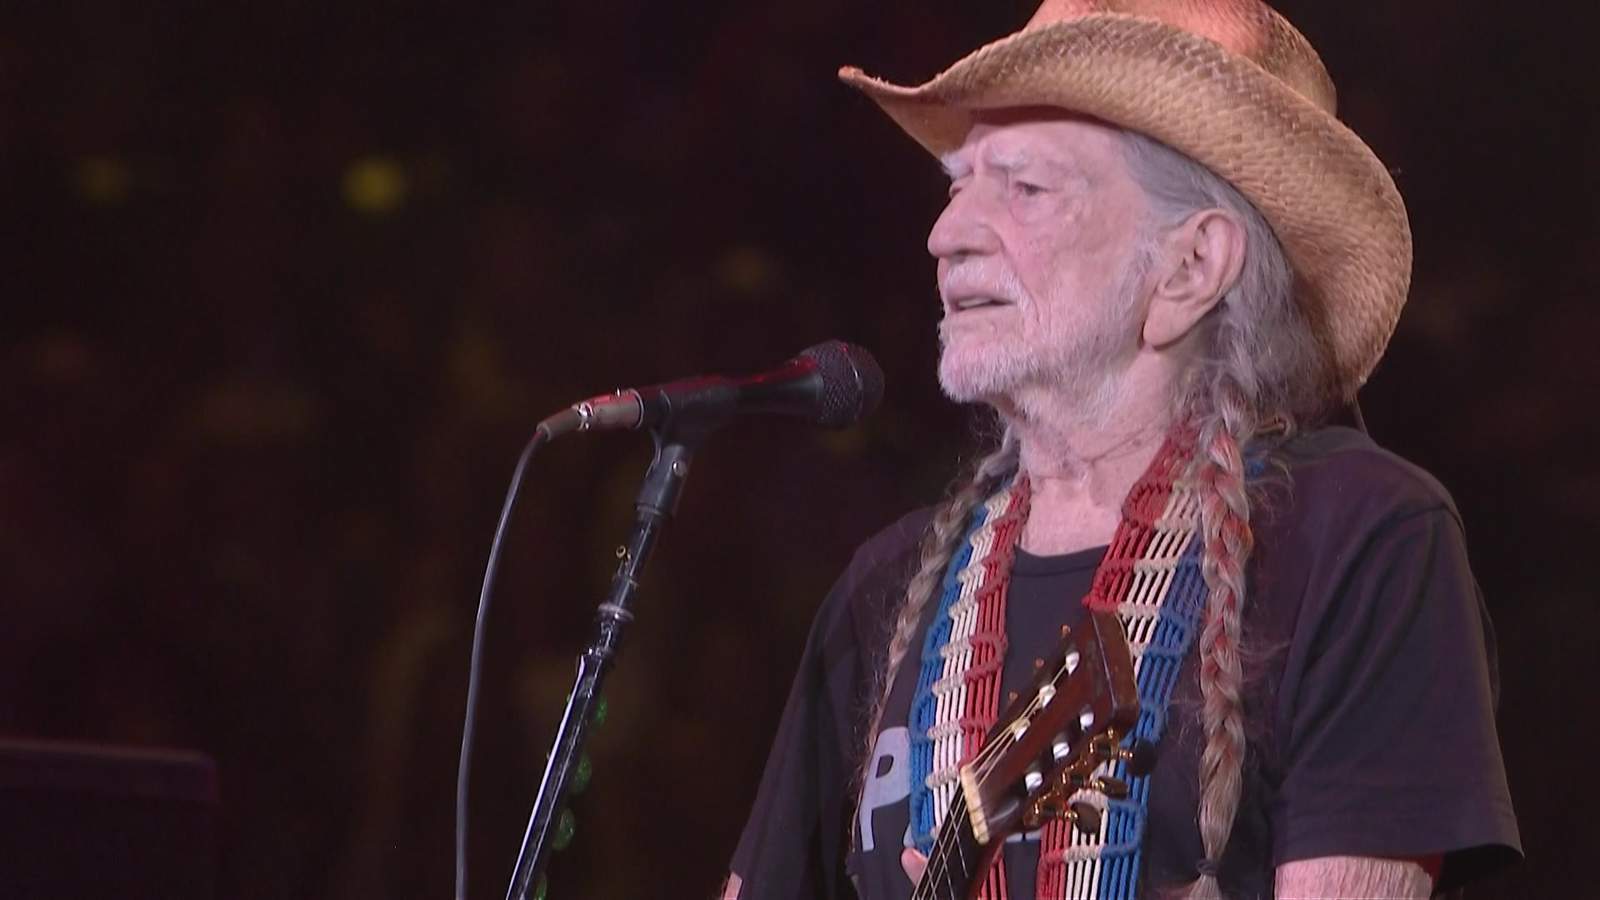 WATCH: Willie Nelson cries on stage during Houston Rodeo performance